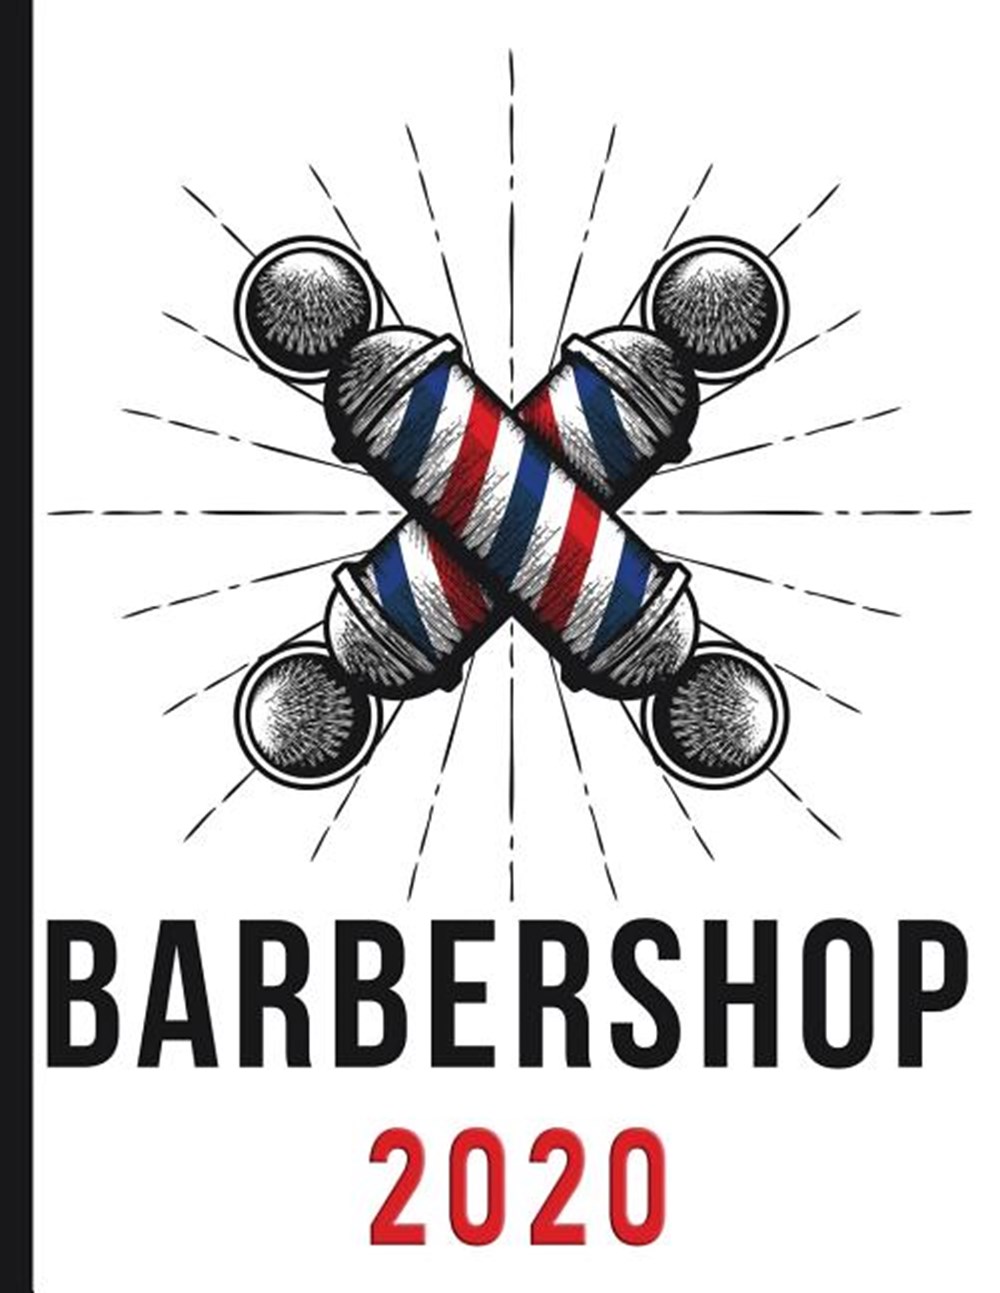 Barbershop - Barber Pole - Red, White, and Blue 2020 Schedule Planner and Organizer / Weekly Calenda